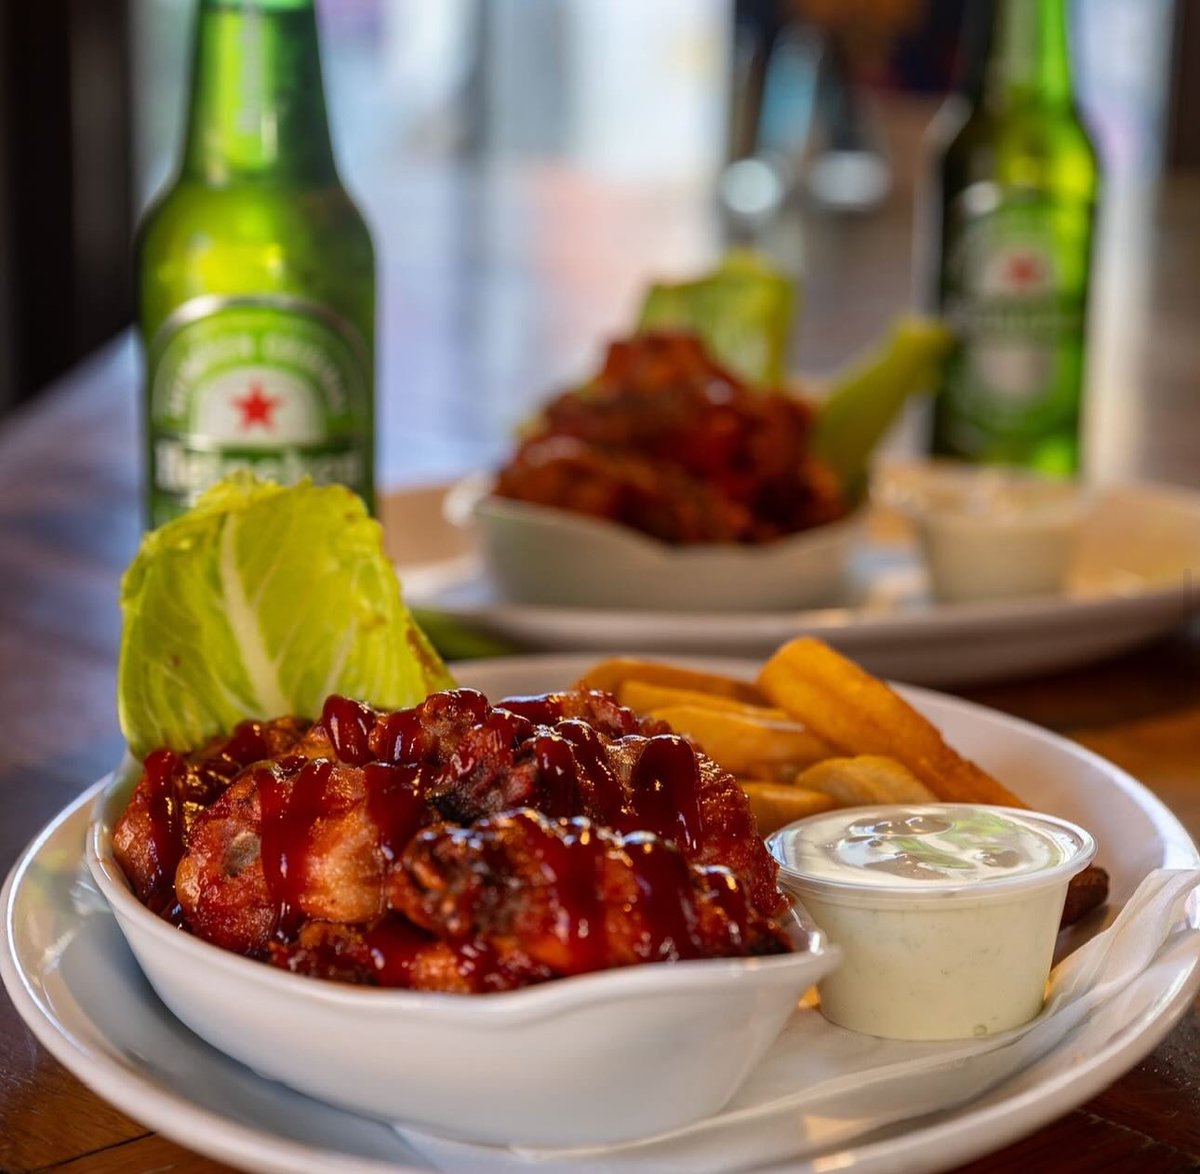 Wednesday Wings & Beers in The Auld Dubliner - sounds like a plan☘️ All Day Menu Served 12pm - 9pm #theaulddubliner #pub #templebar #dublin #dublinpubs